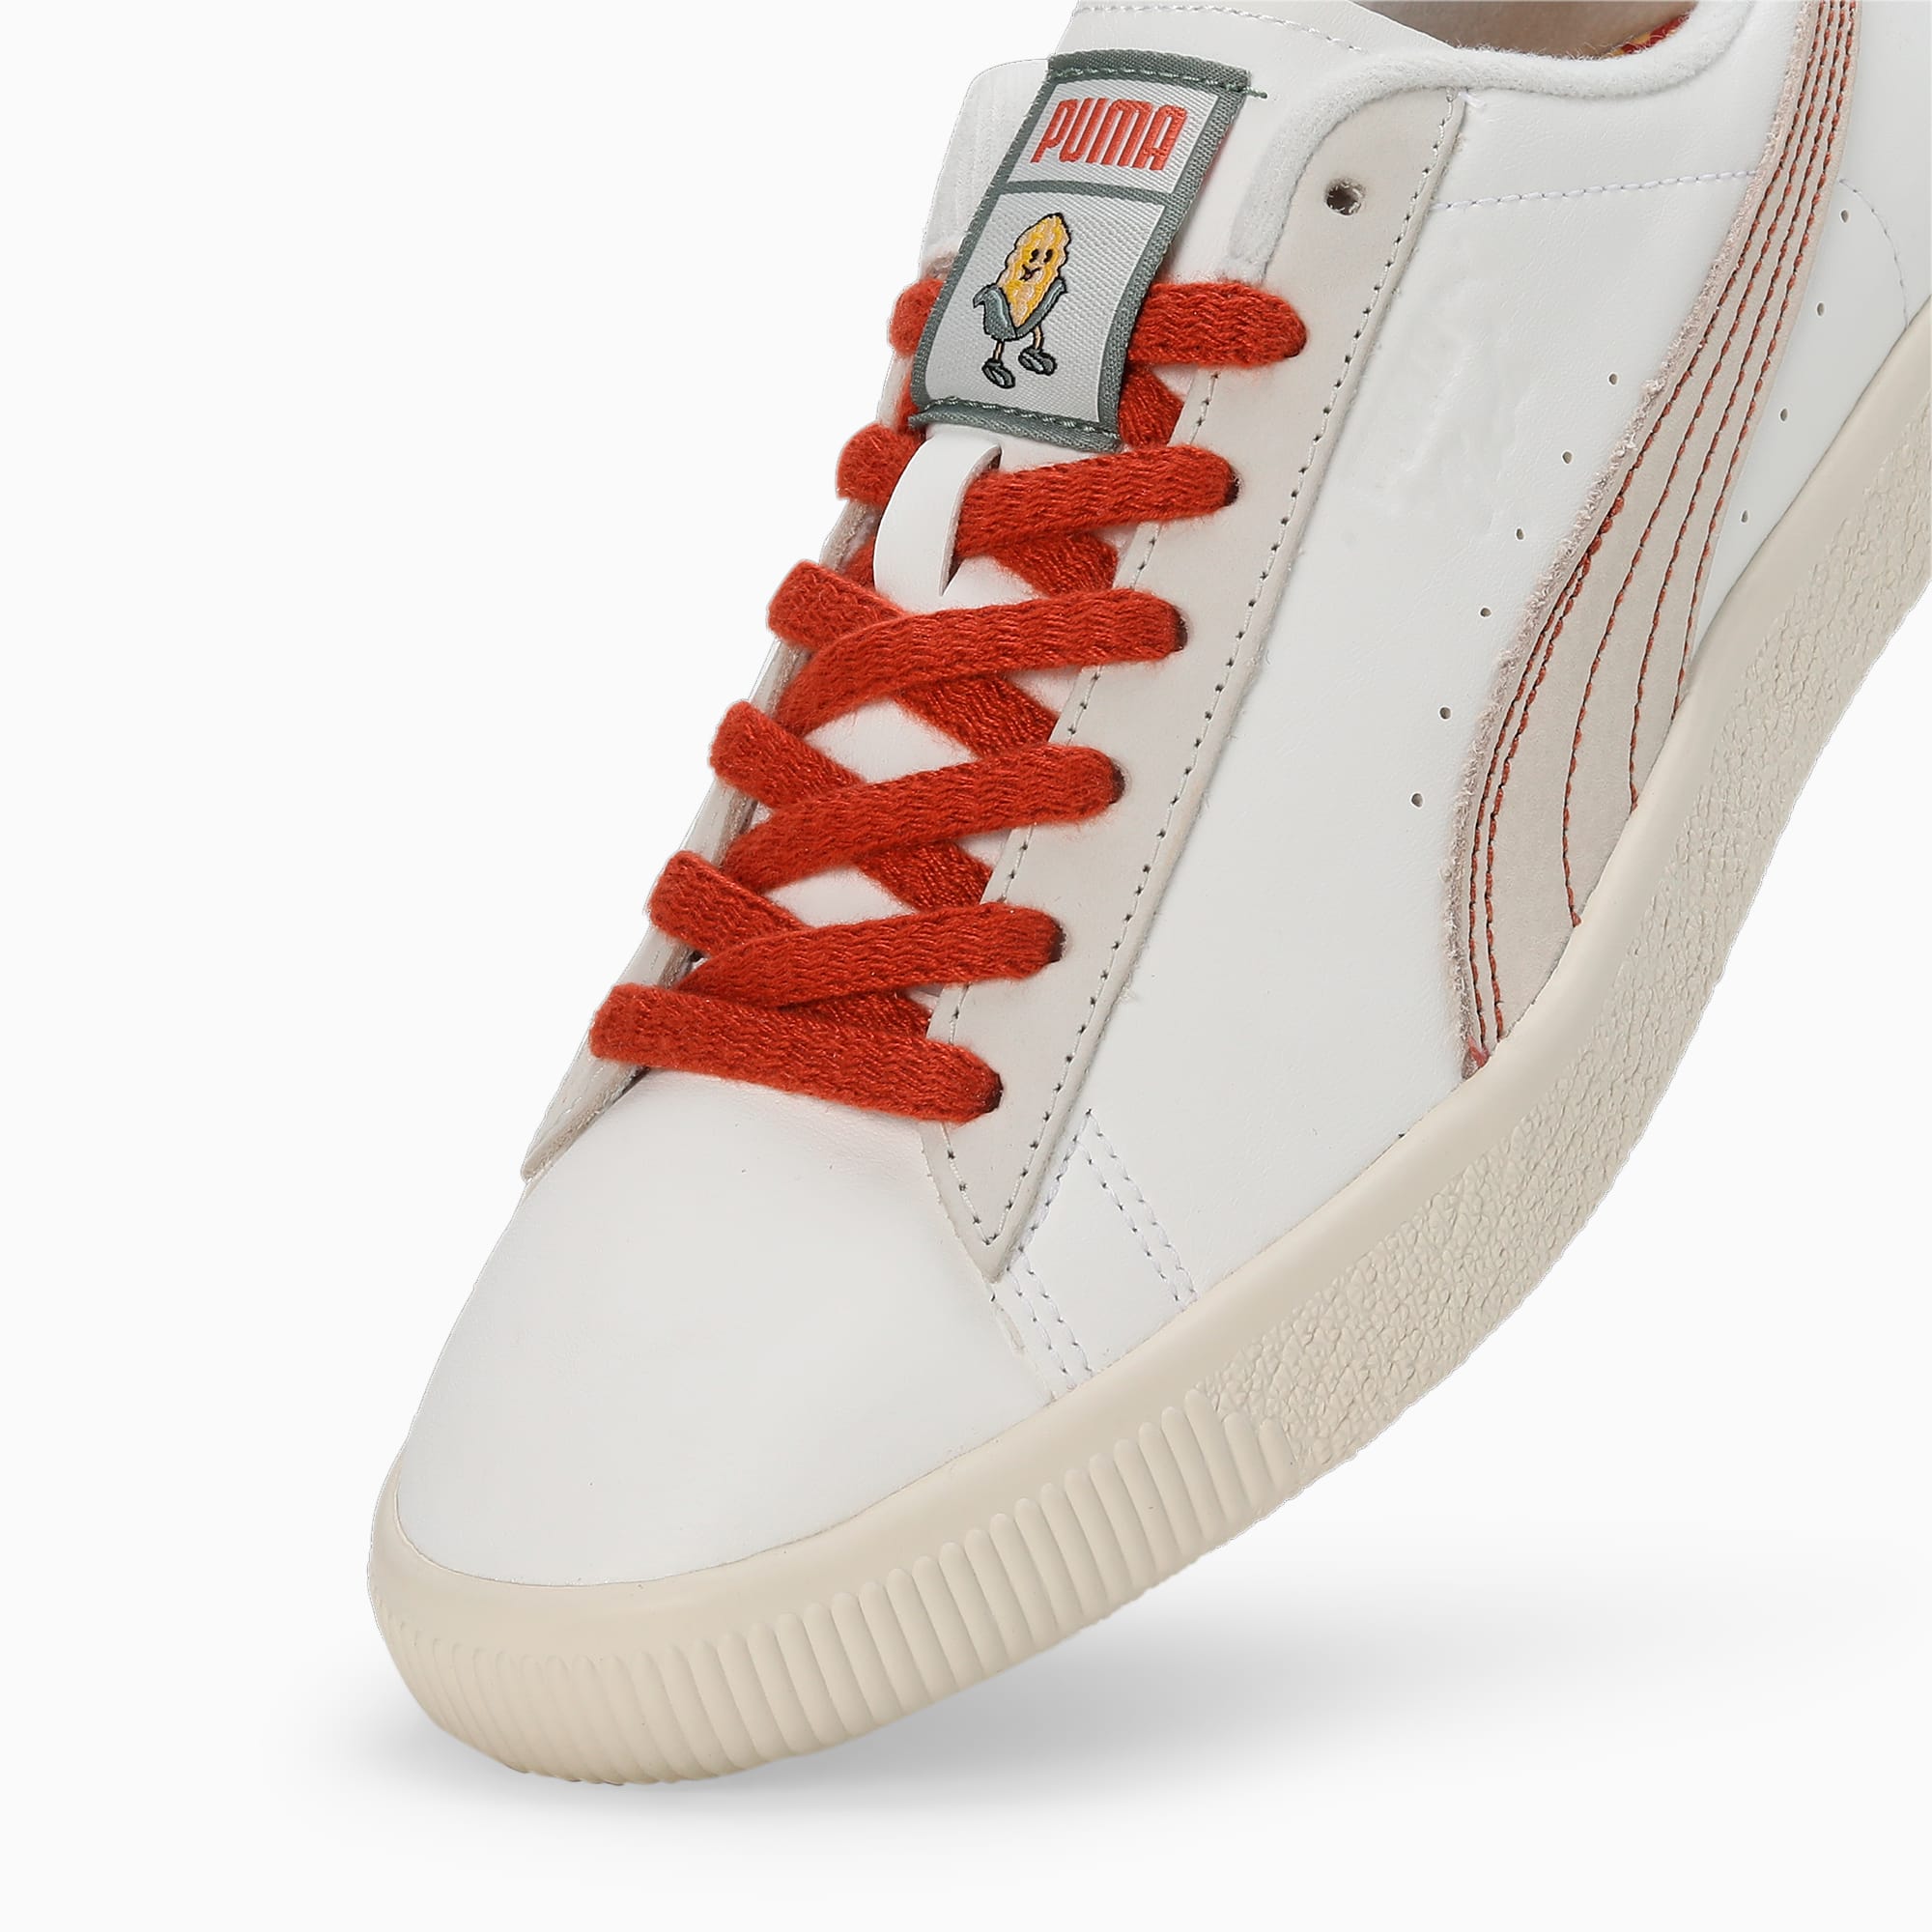 Puma Clyde Huskie Corn-Based Sneakers, White, 10